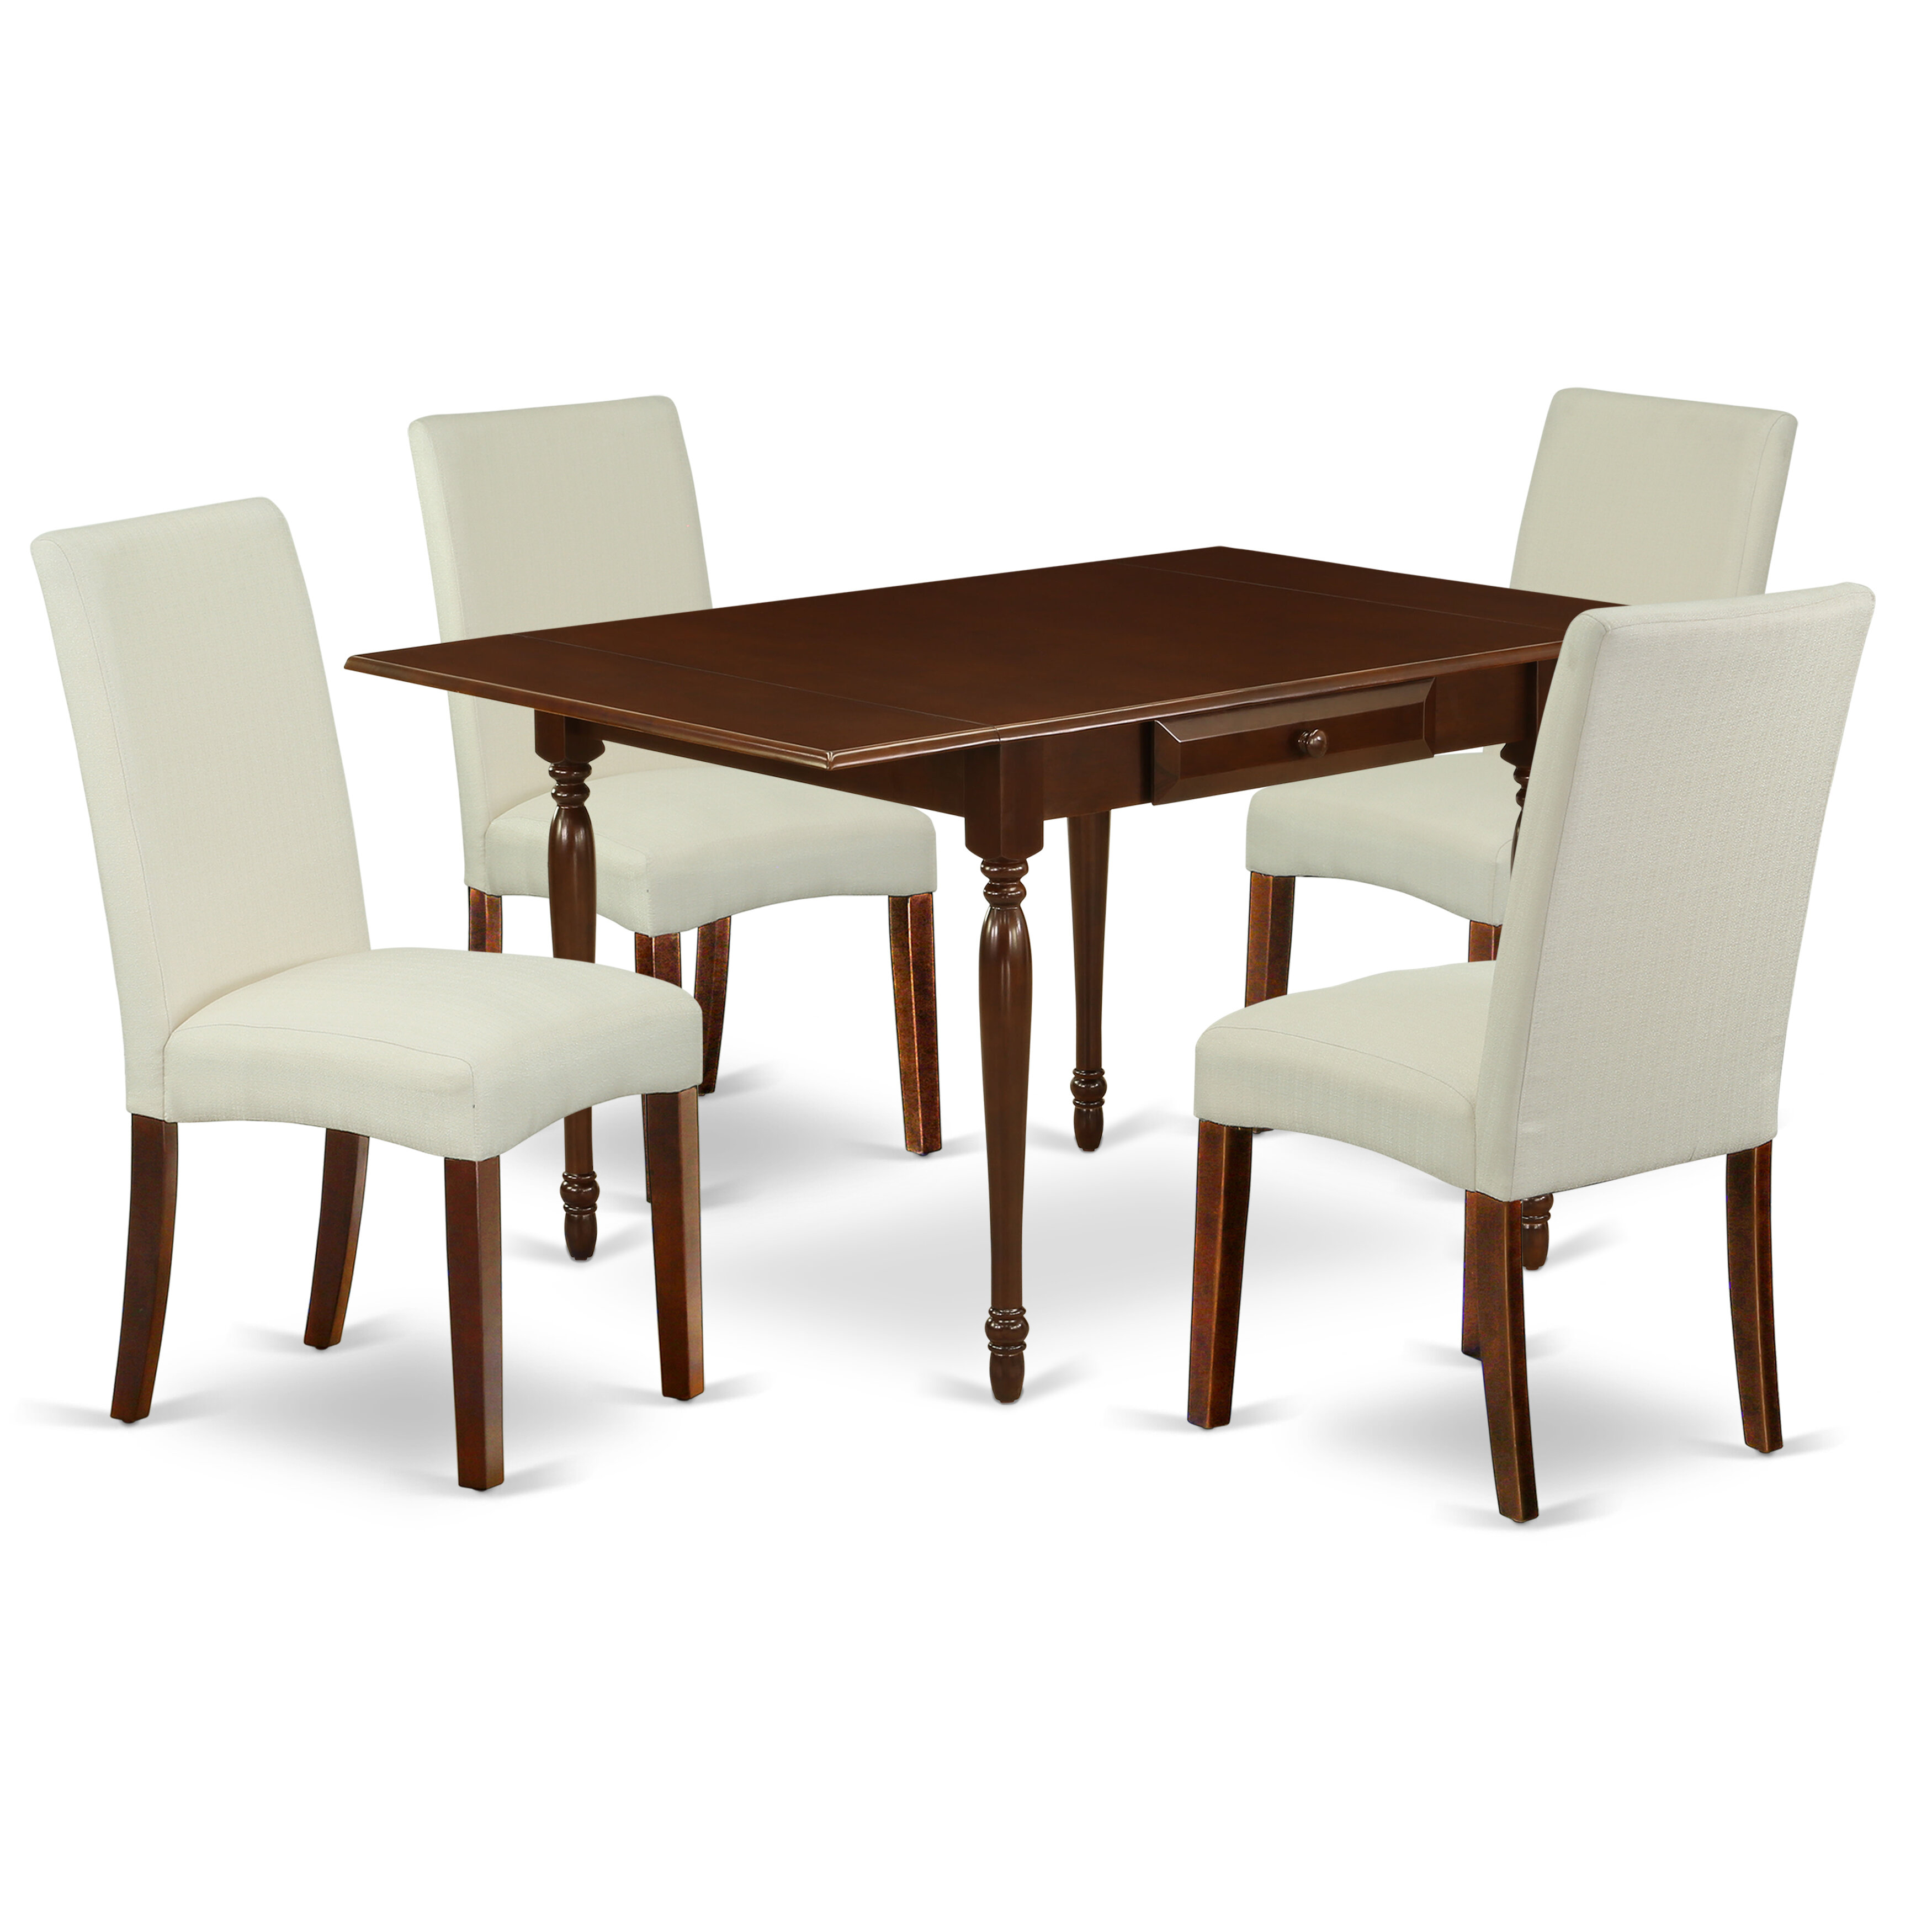 Ophelia Co 5Pc Kitchen Table Set Consists Of A Small Kitchen Table And 4 Parsons Chairs With Dark Khaki Colour Linen Fabric